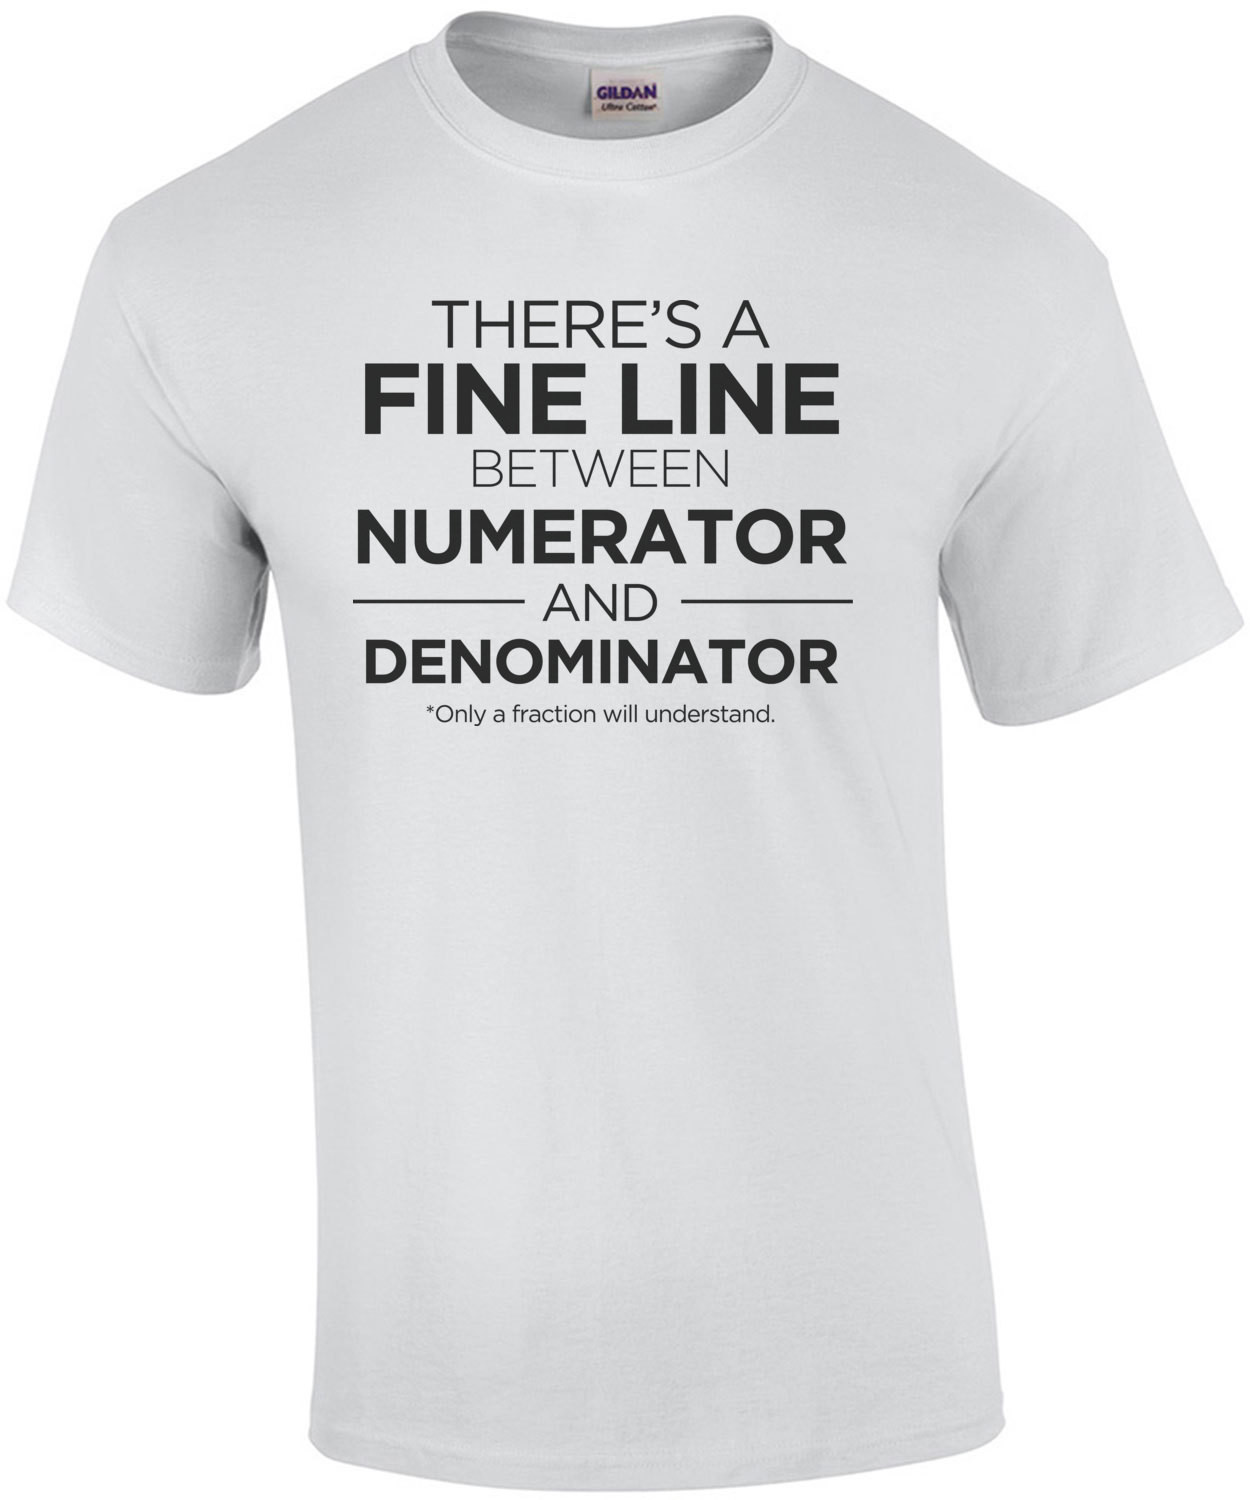 There's a fine line between numerator and denominator - funny math